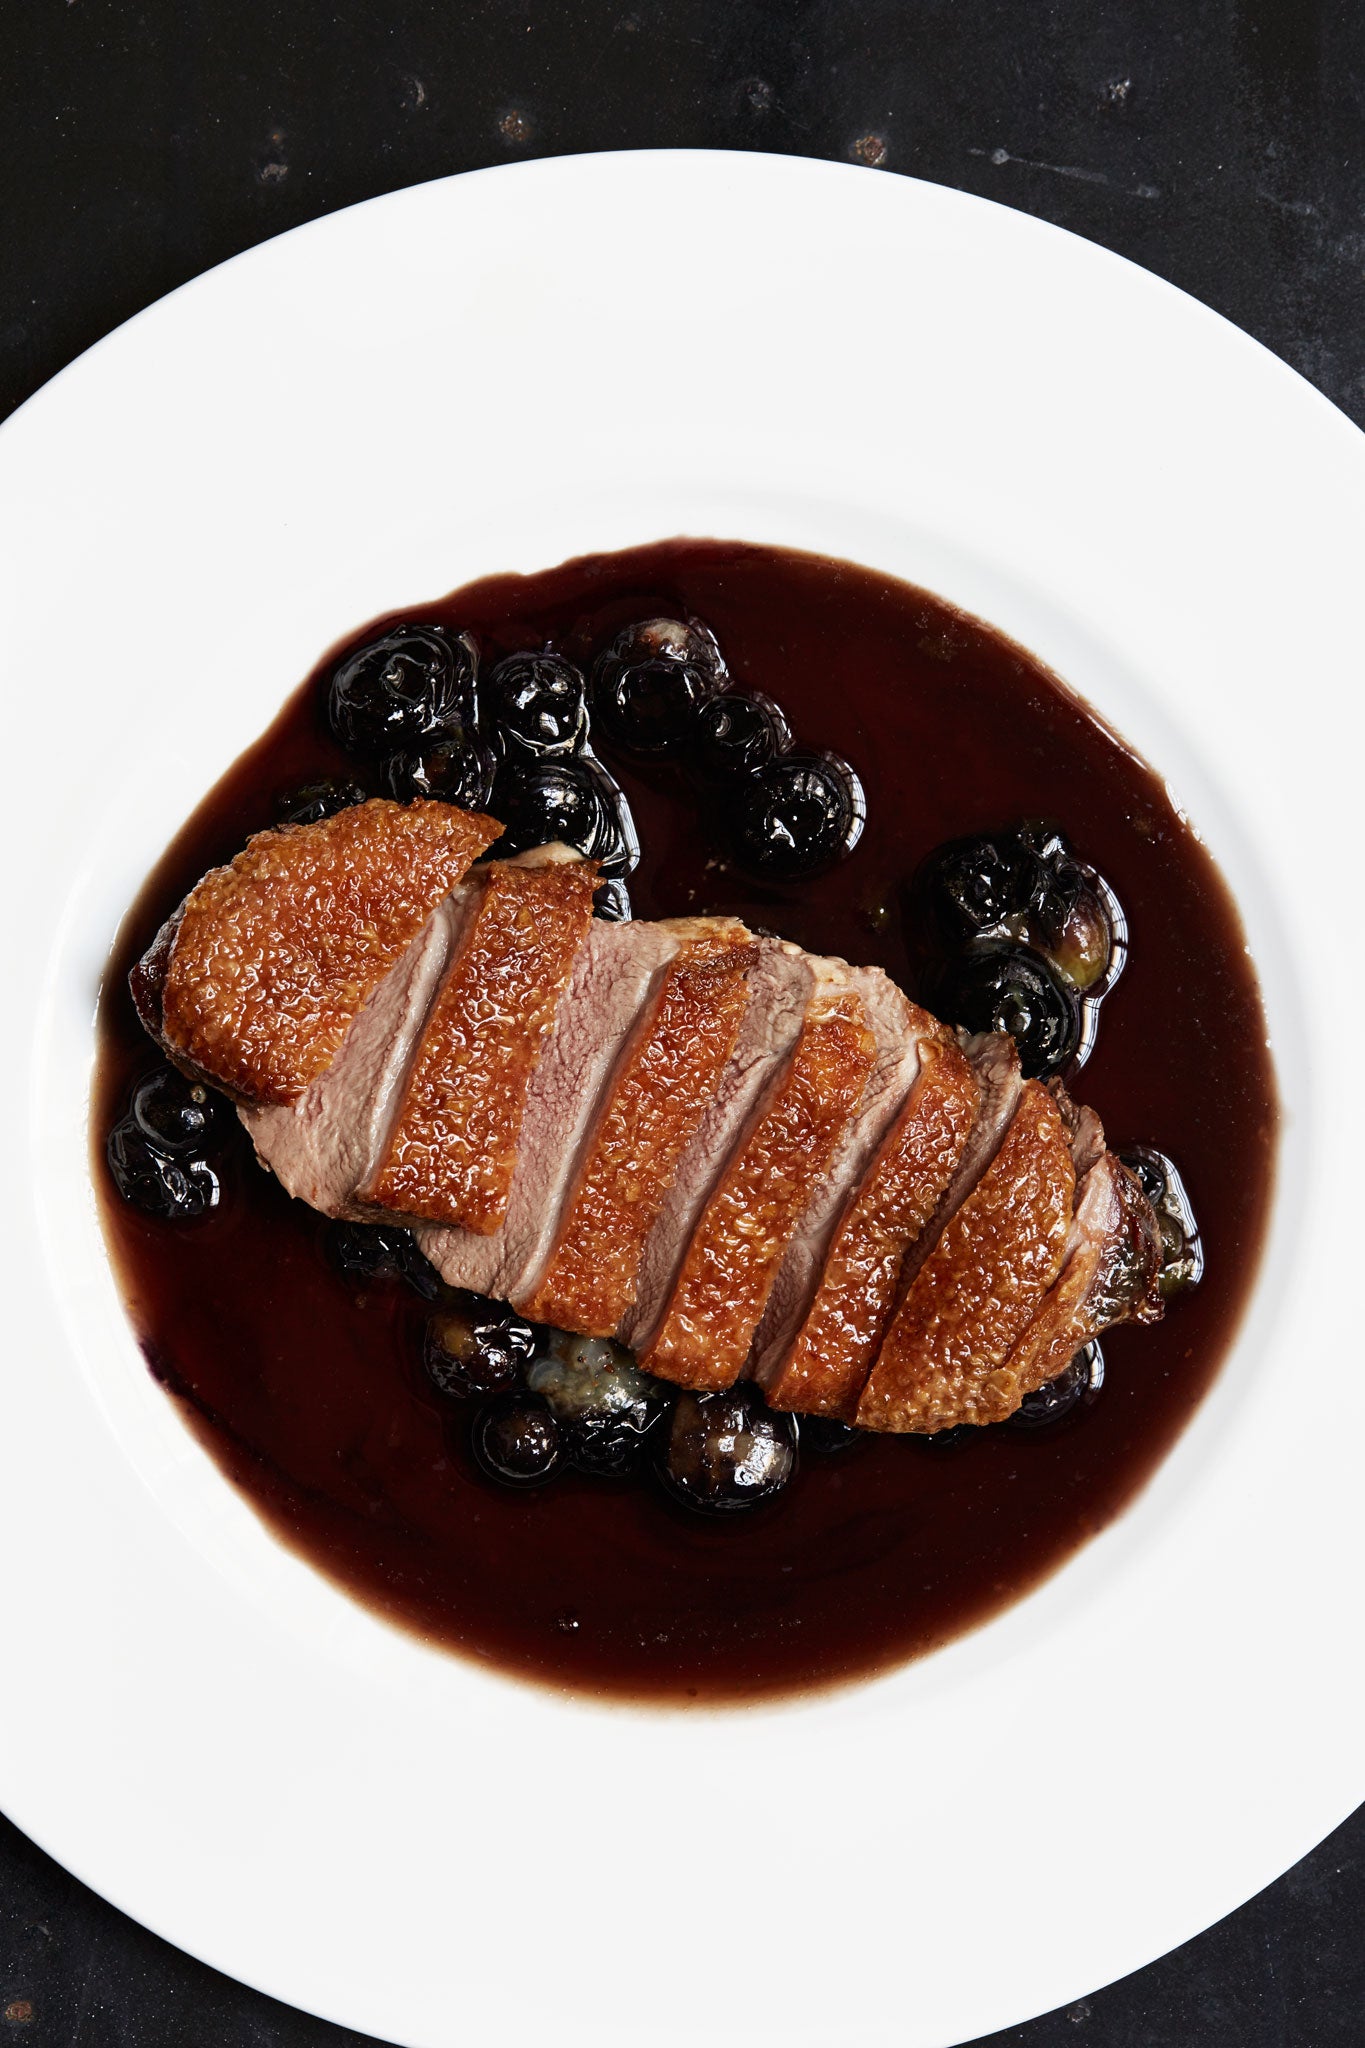 Getting fruity: Mark's duck with blueberries